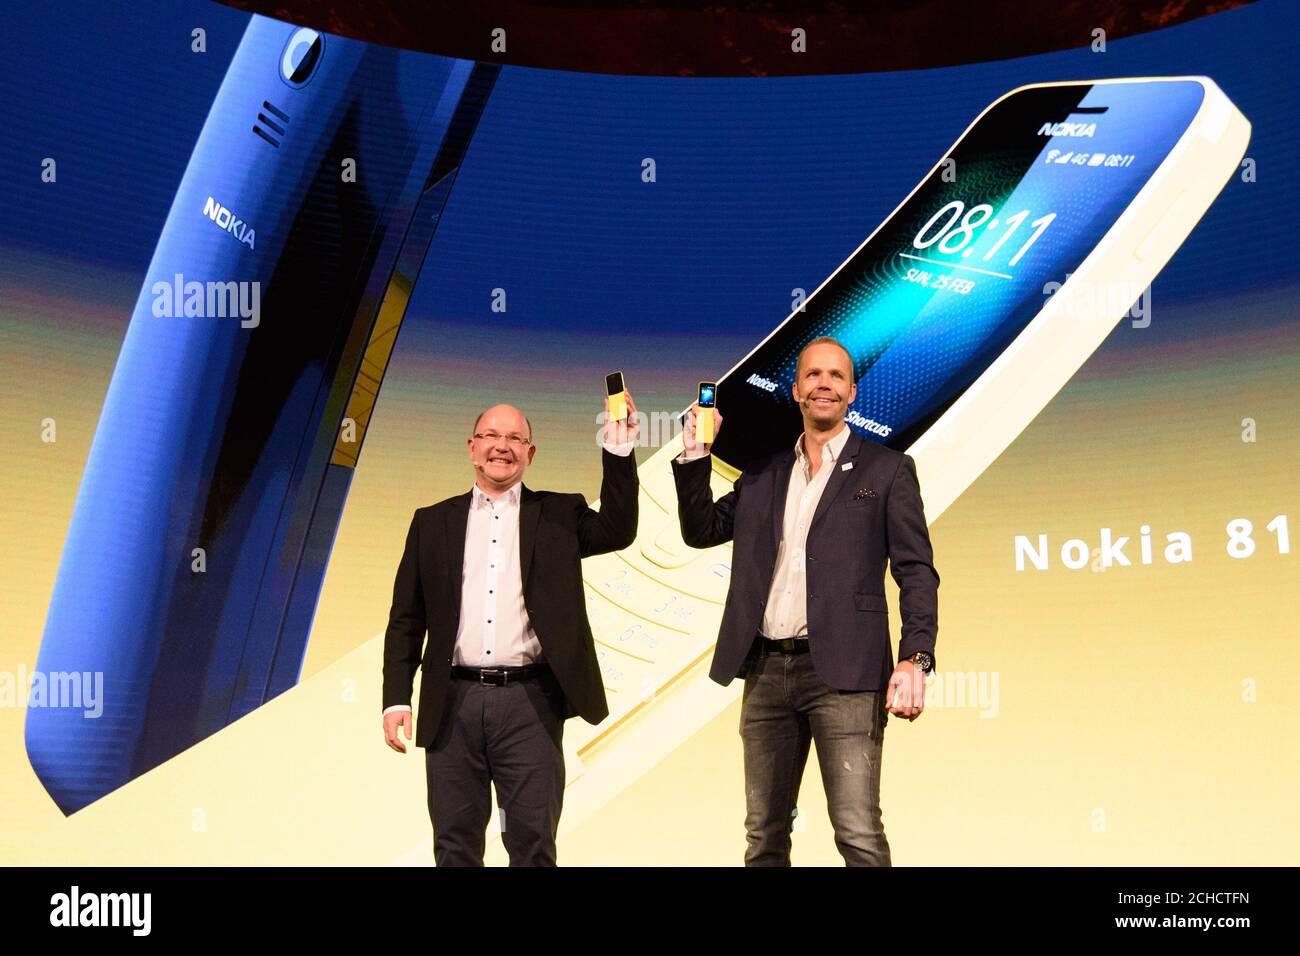 EDITORIAL USE ONLY Florian Seiche, CEO od HMD Global (left), and Juho Sarvikas, Chief Product Officer, HMD Global, announce on stage five new Nokia handsets, which include the Nokia 8 Sirocco, Nokia 7 Plus, the New Nokia 6, the Nokia 1 and the reloaded Nokia 8110 with 4G, at the Mobile World Congress in Barcelona. Stock Photo